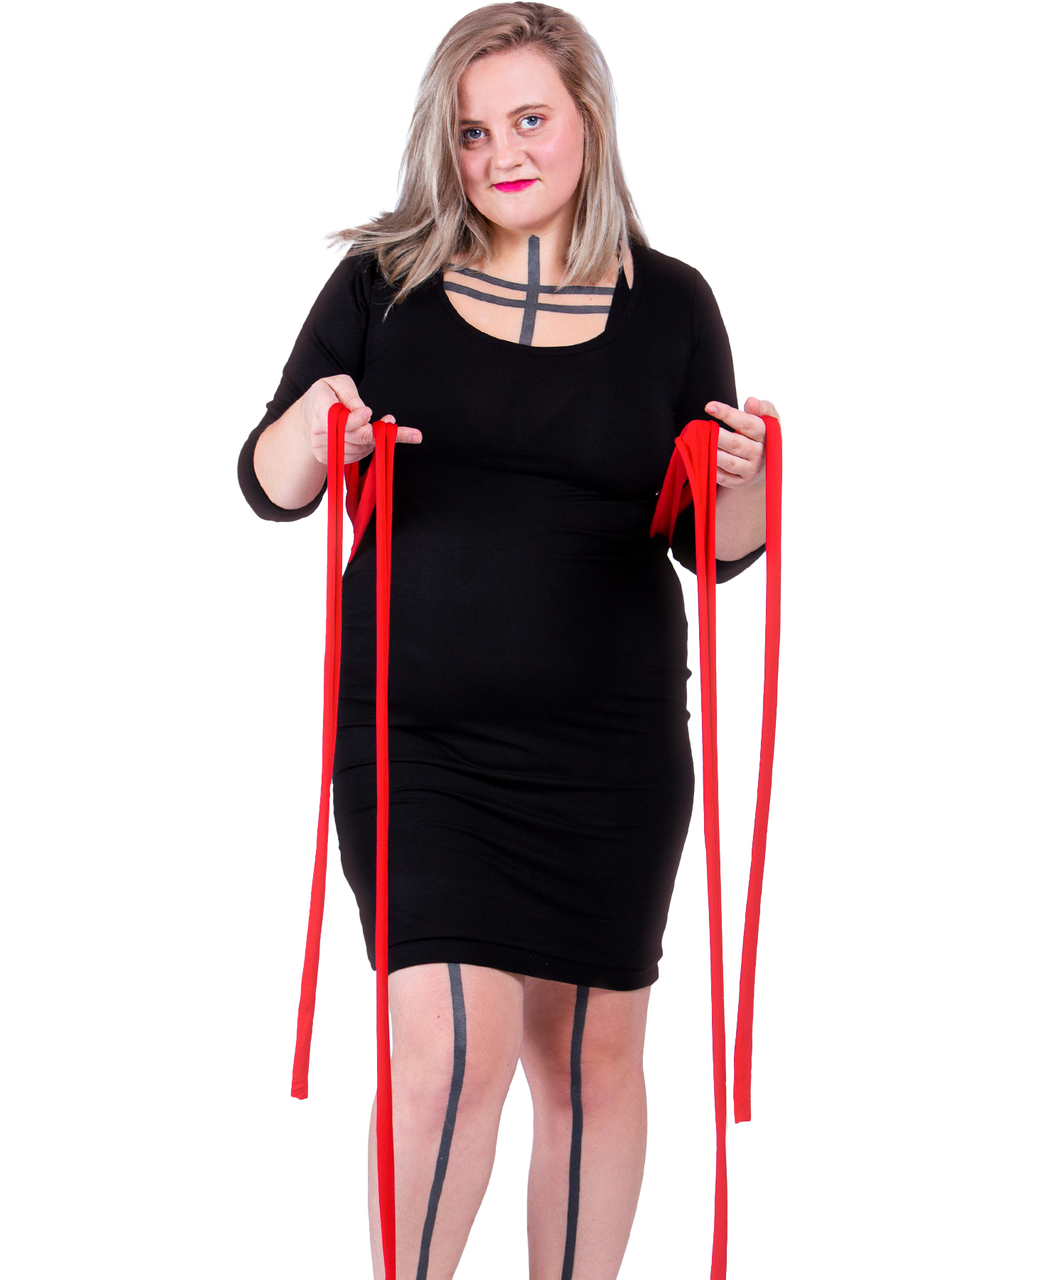 MAKE black tencel dress with sewn-in red sashes